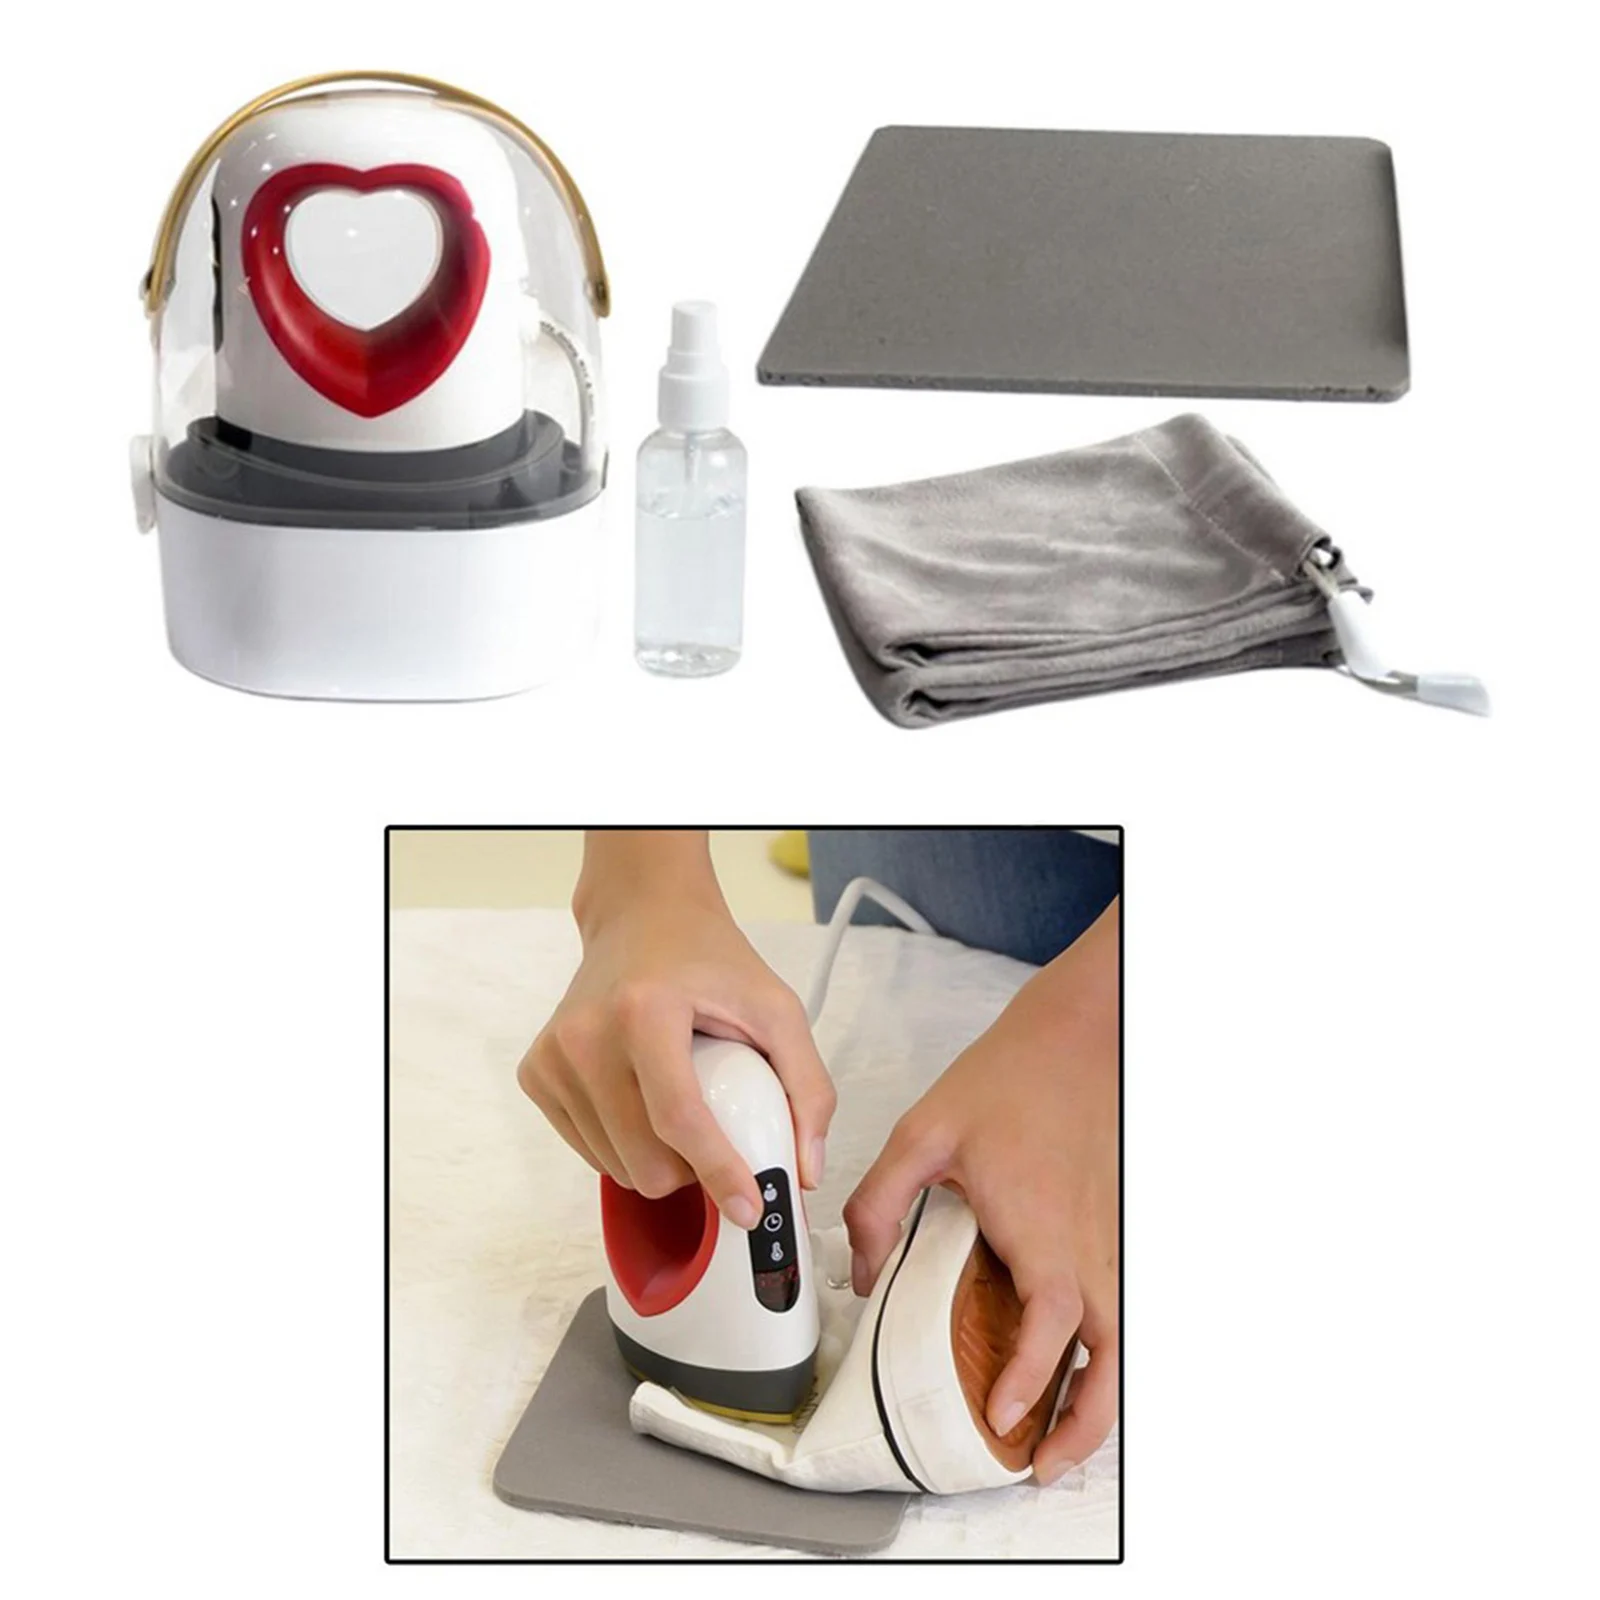 Portable Mini Easy Heat Press Machine LCD Dispaly Heating Transfer Ironing for Shoes Hats Bags Small HTV Vinyl Crafts